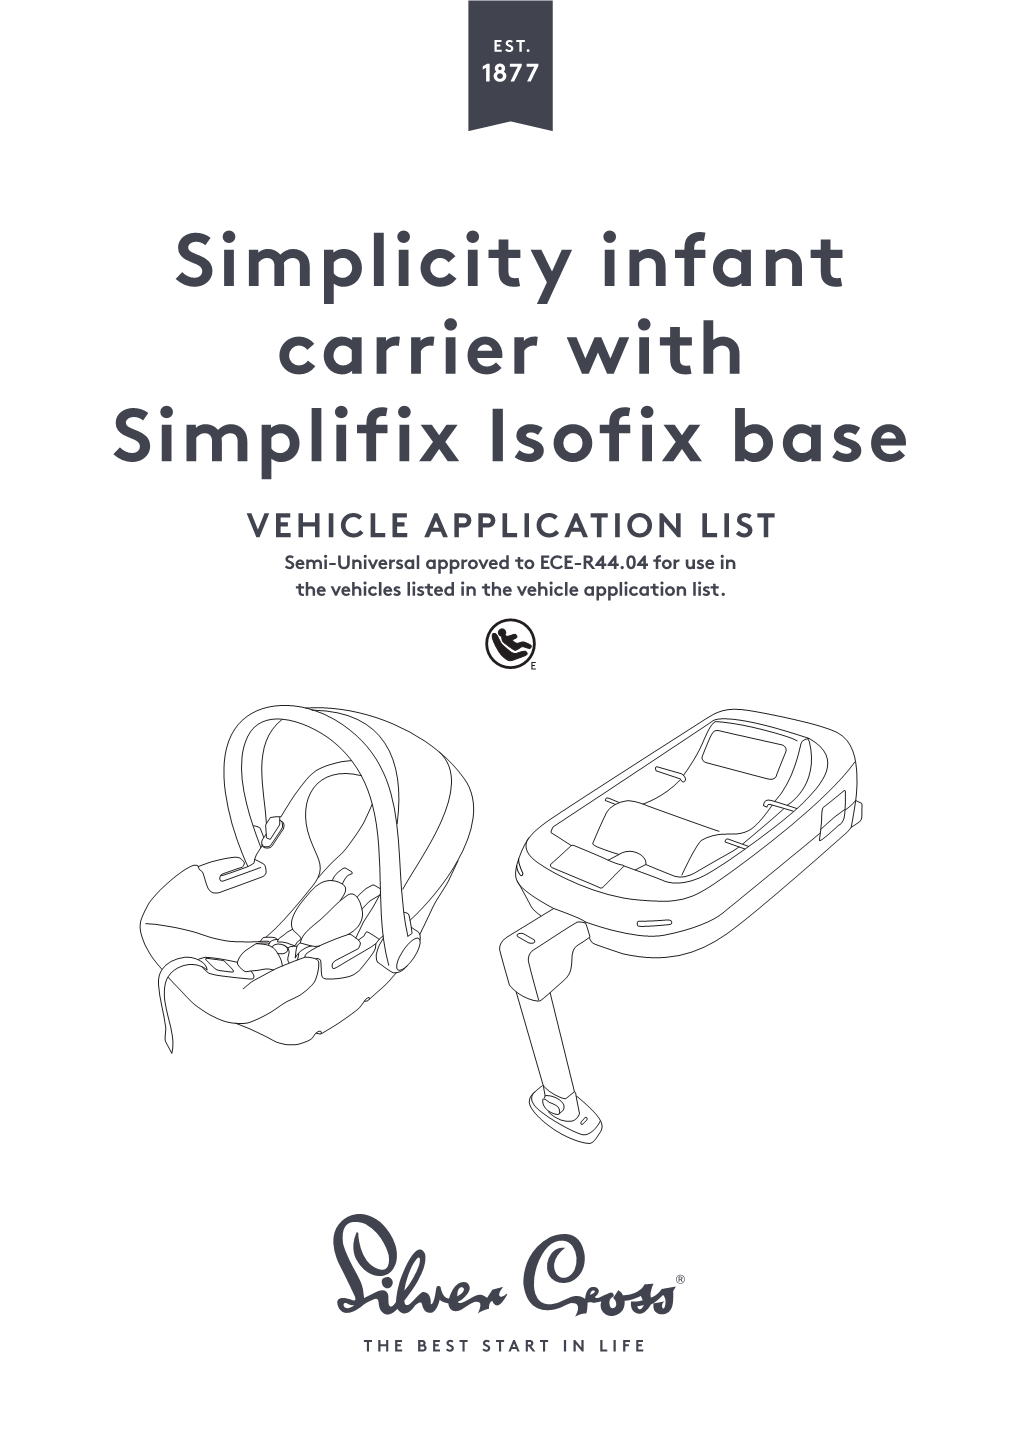 Simplicity Infant Carrier with Simplifix Isofix Base